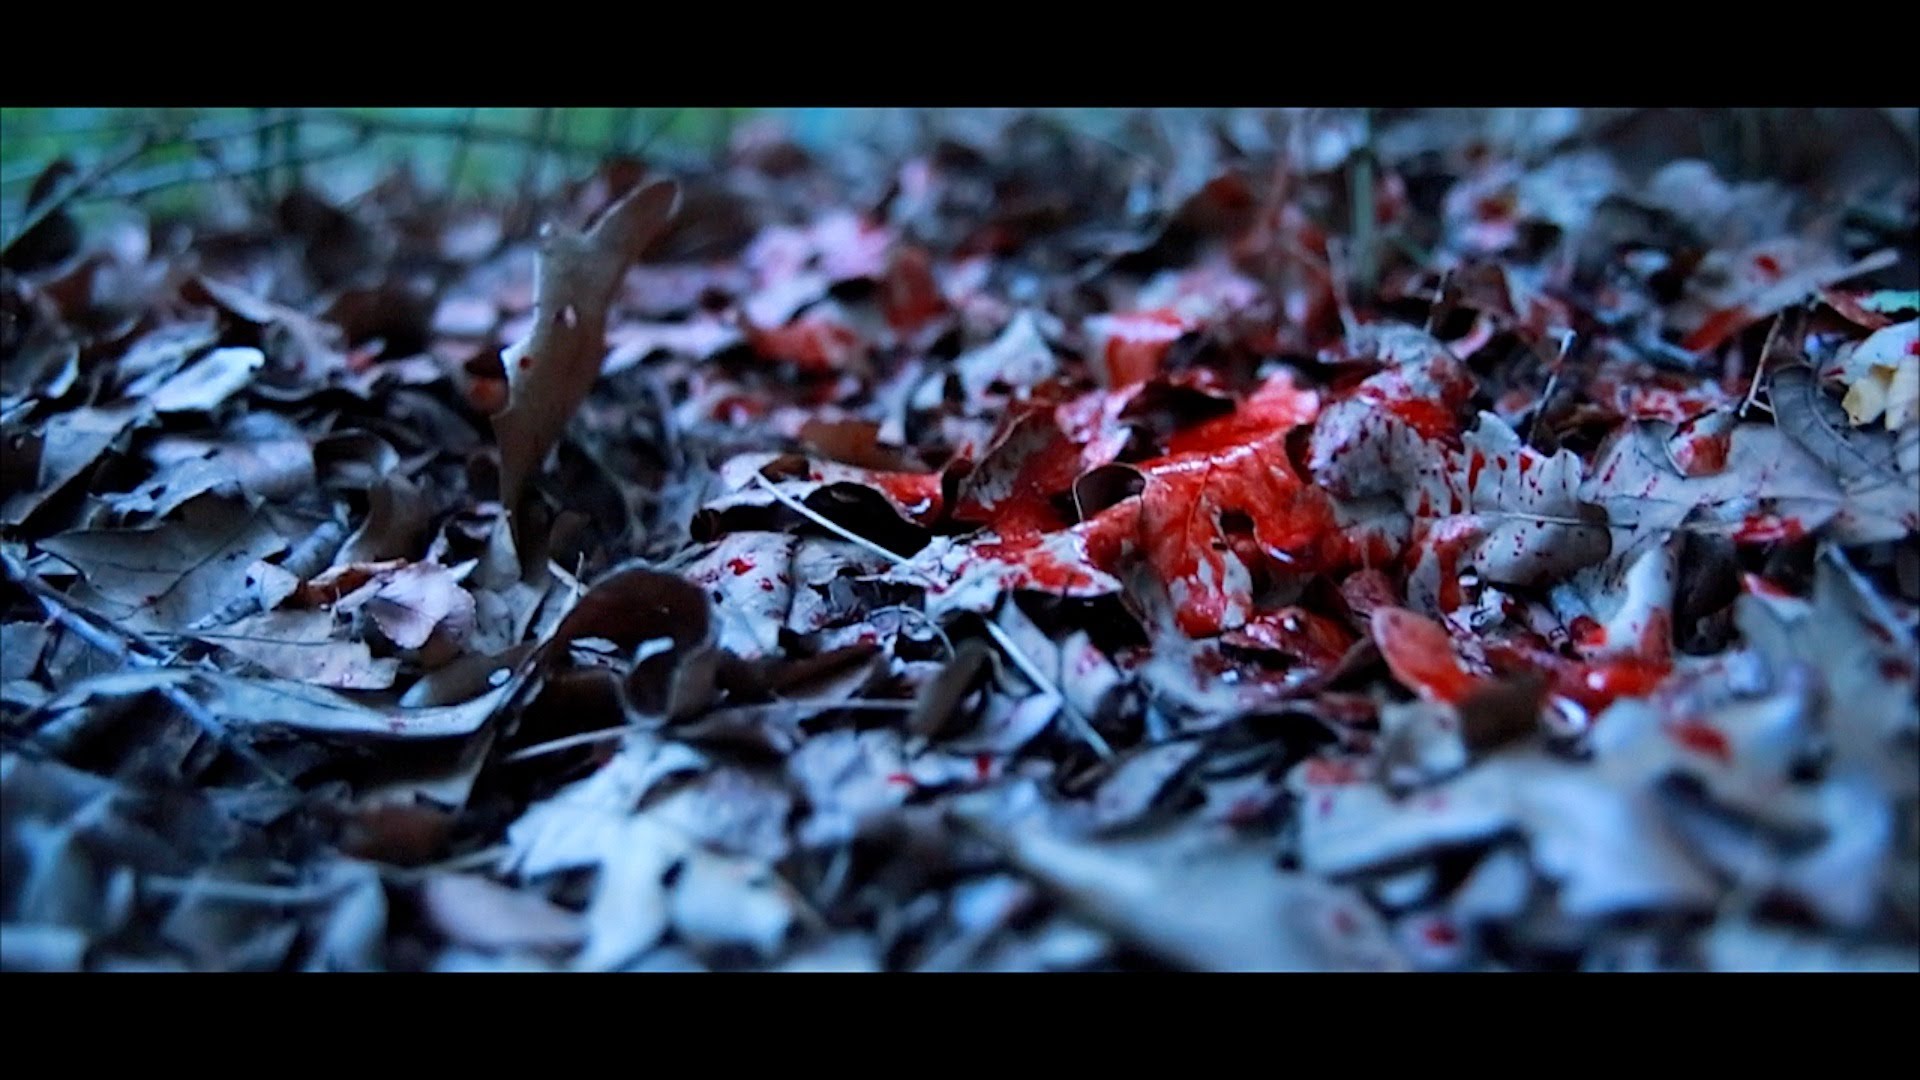 Blake T “Blood On The Leaves” [VIDEO]